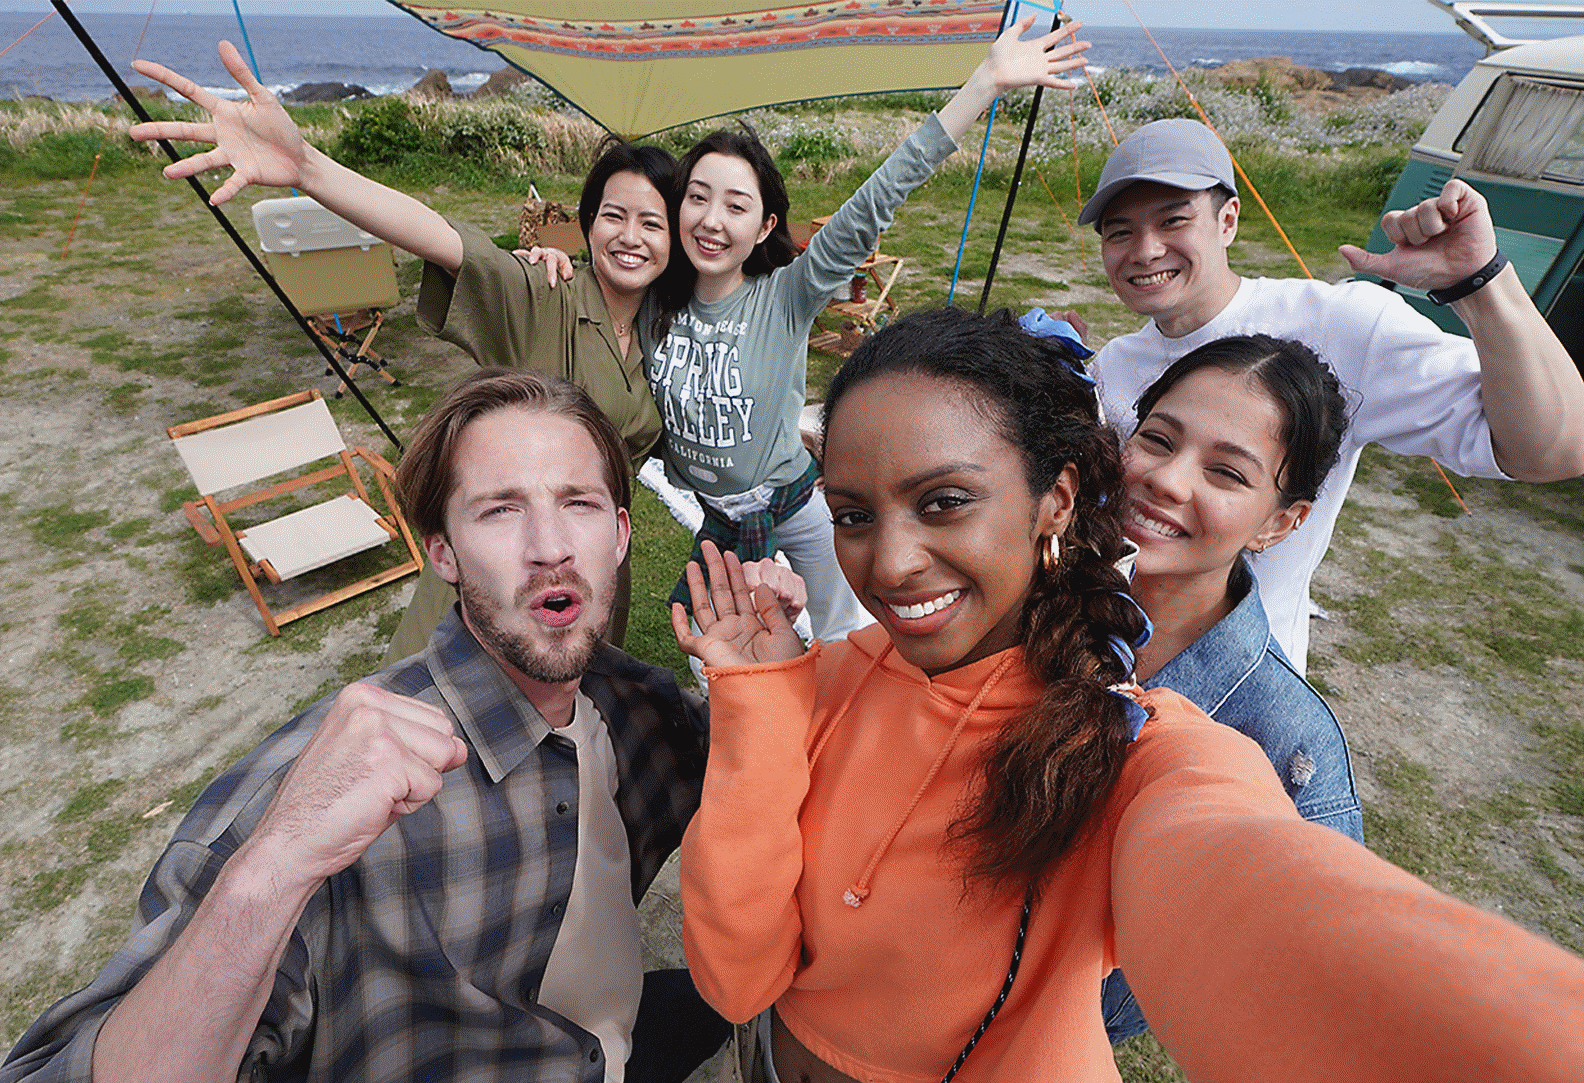 Image showing that multiple people can fit in the frame, even when shooting a selfie